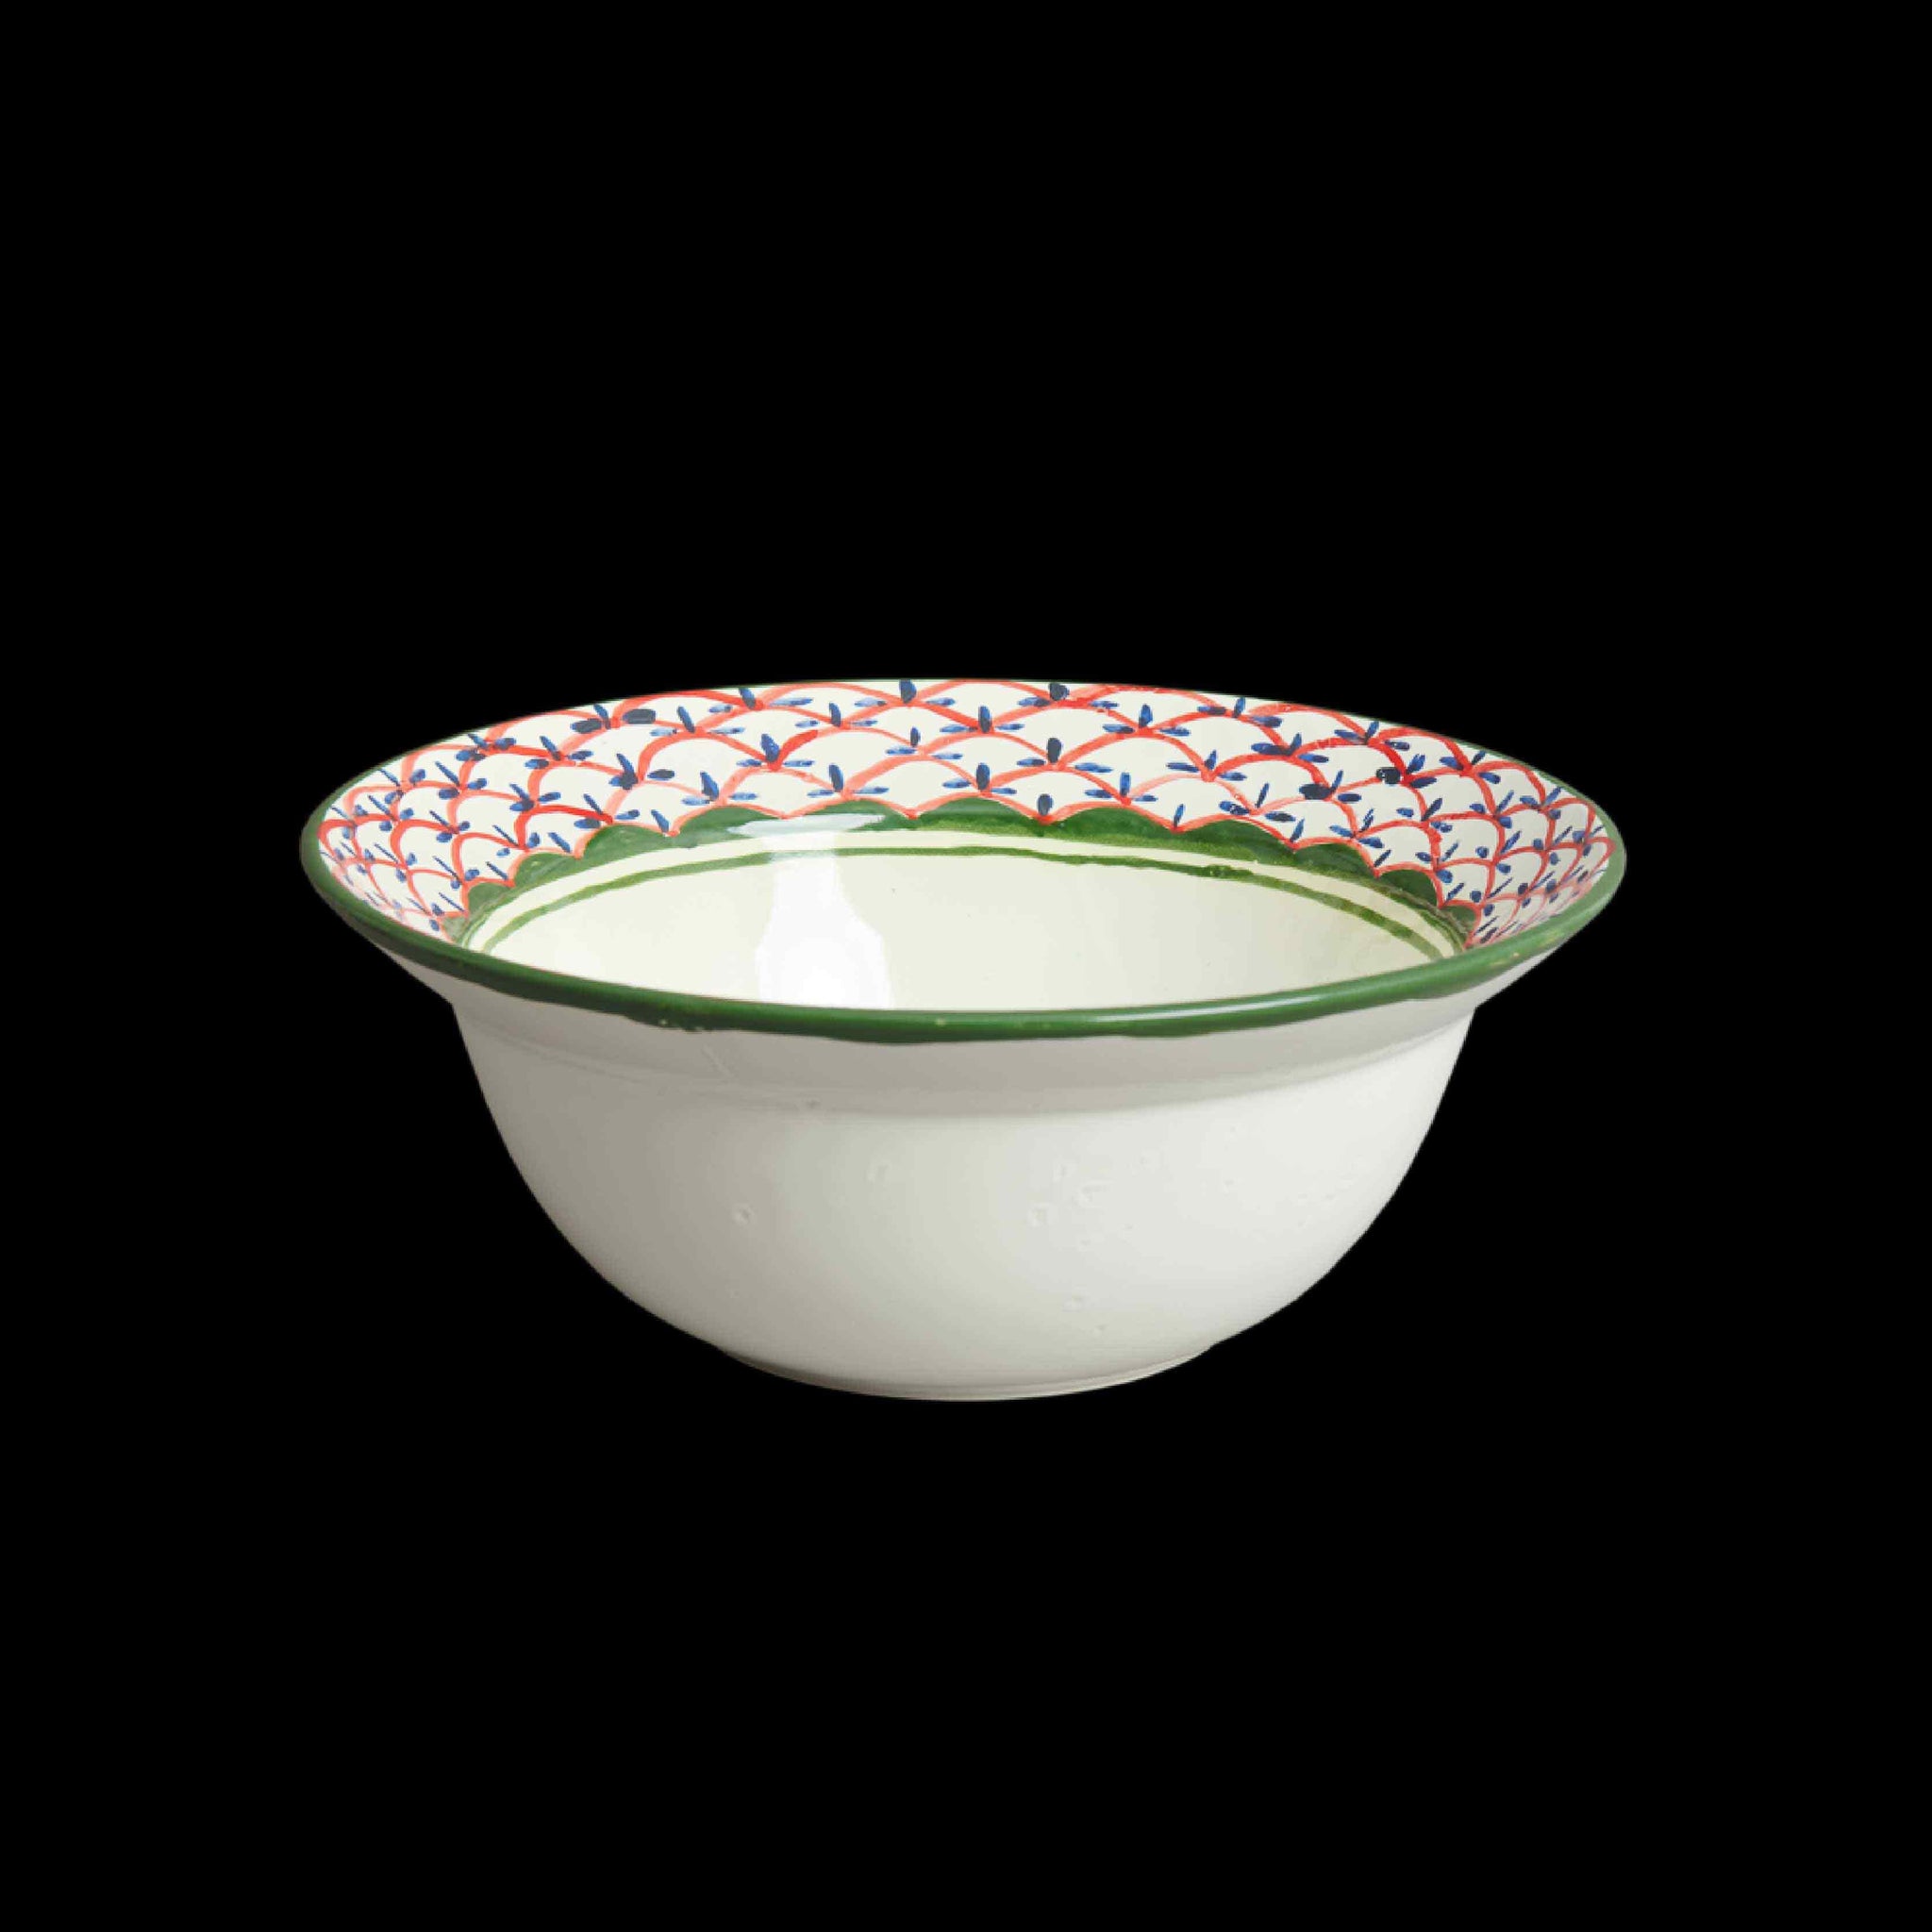 #020 THE SERVING BOWL